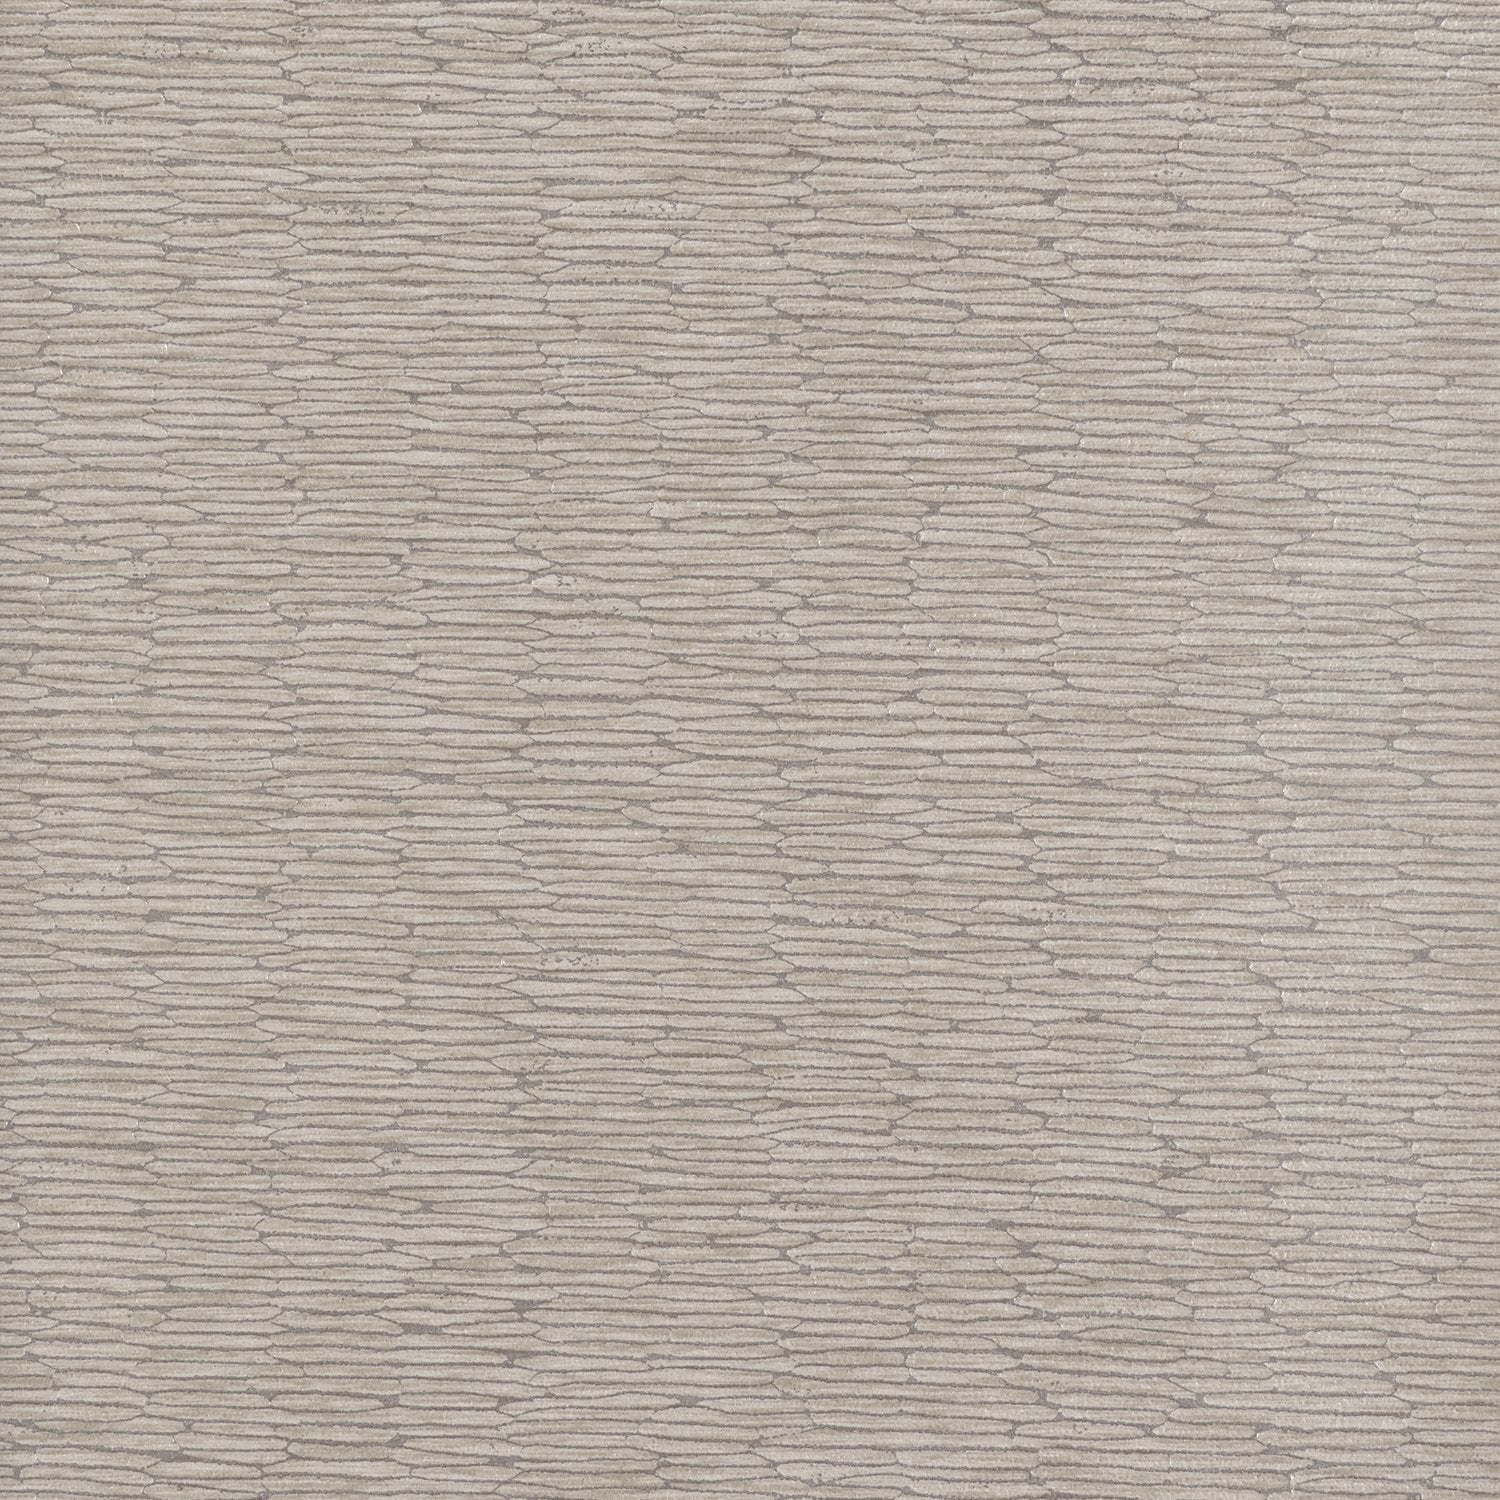 Chipper - Y46868 - Wallcovering - Vycon - Kube Contract